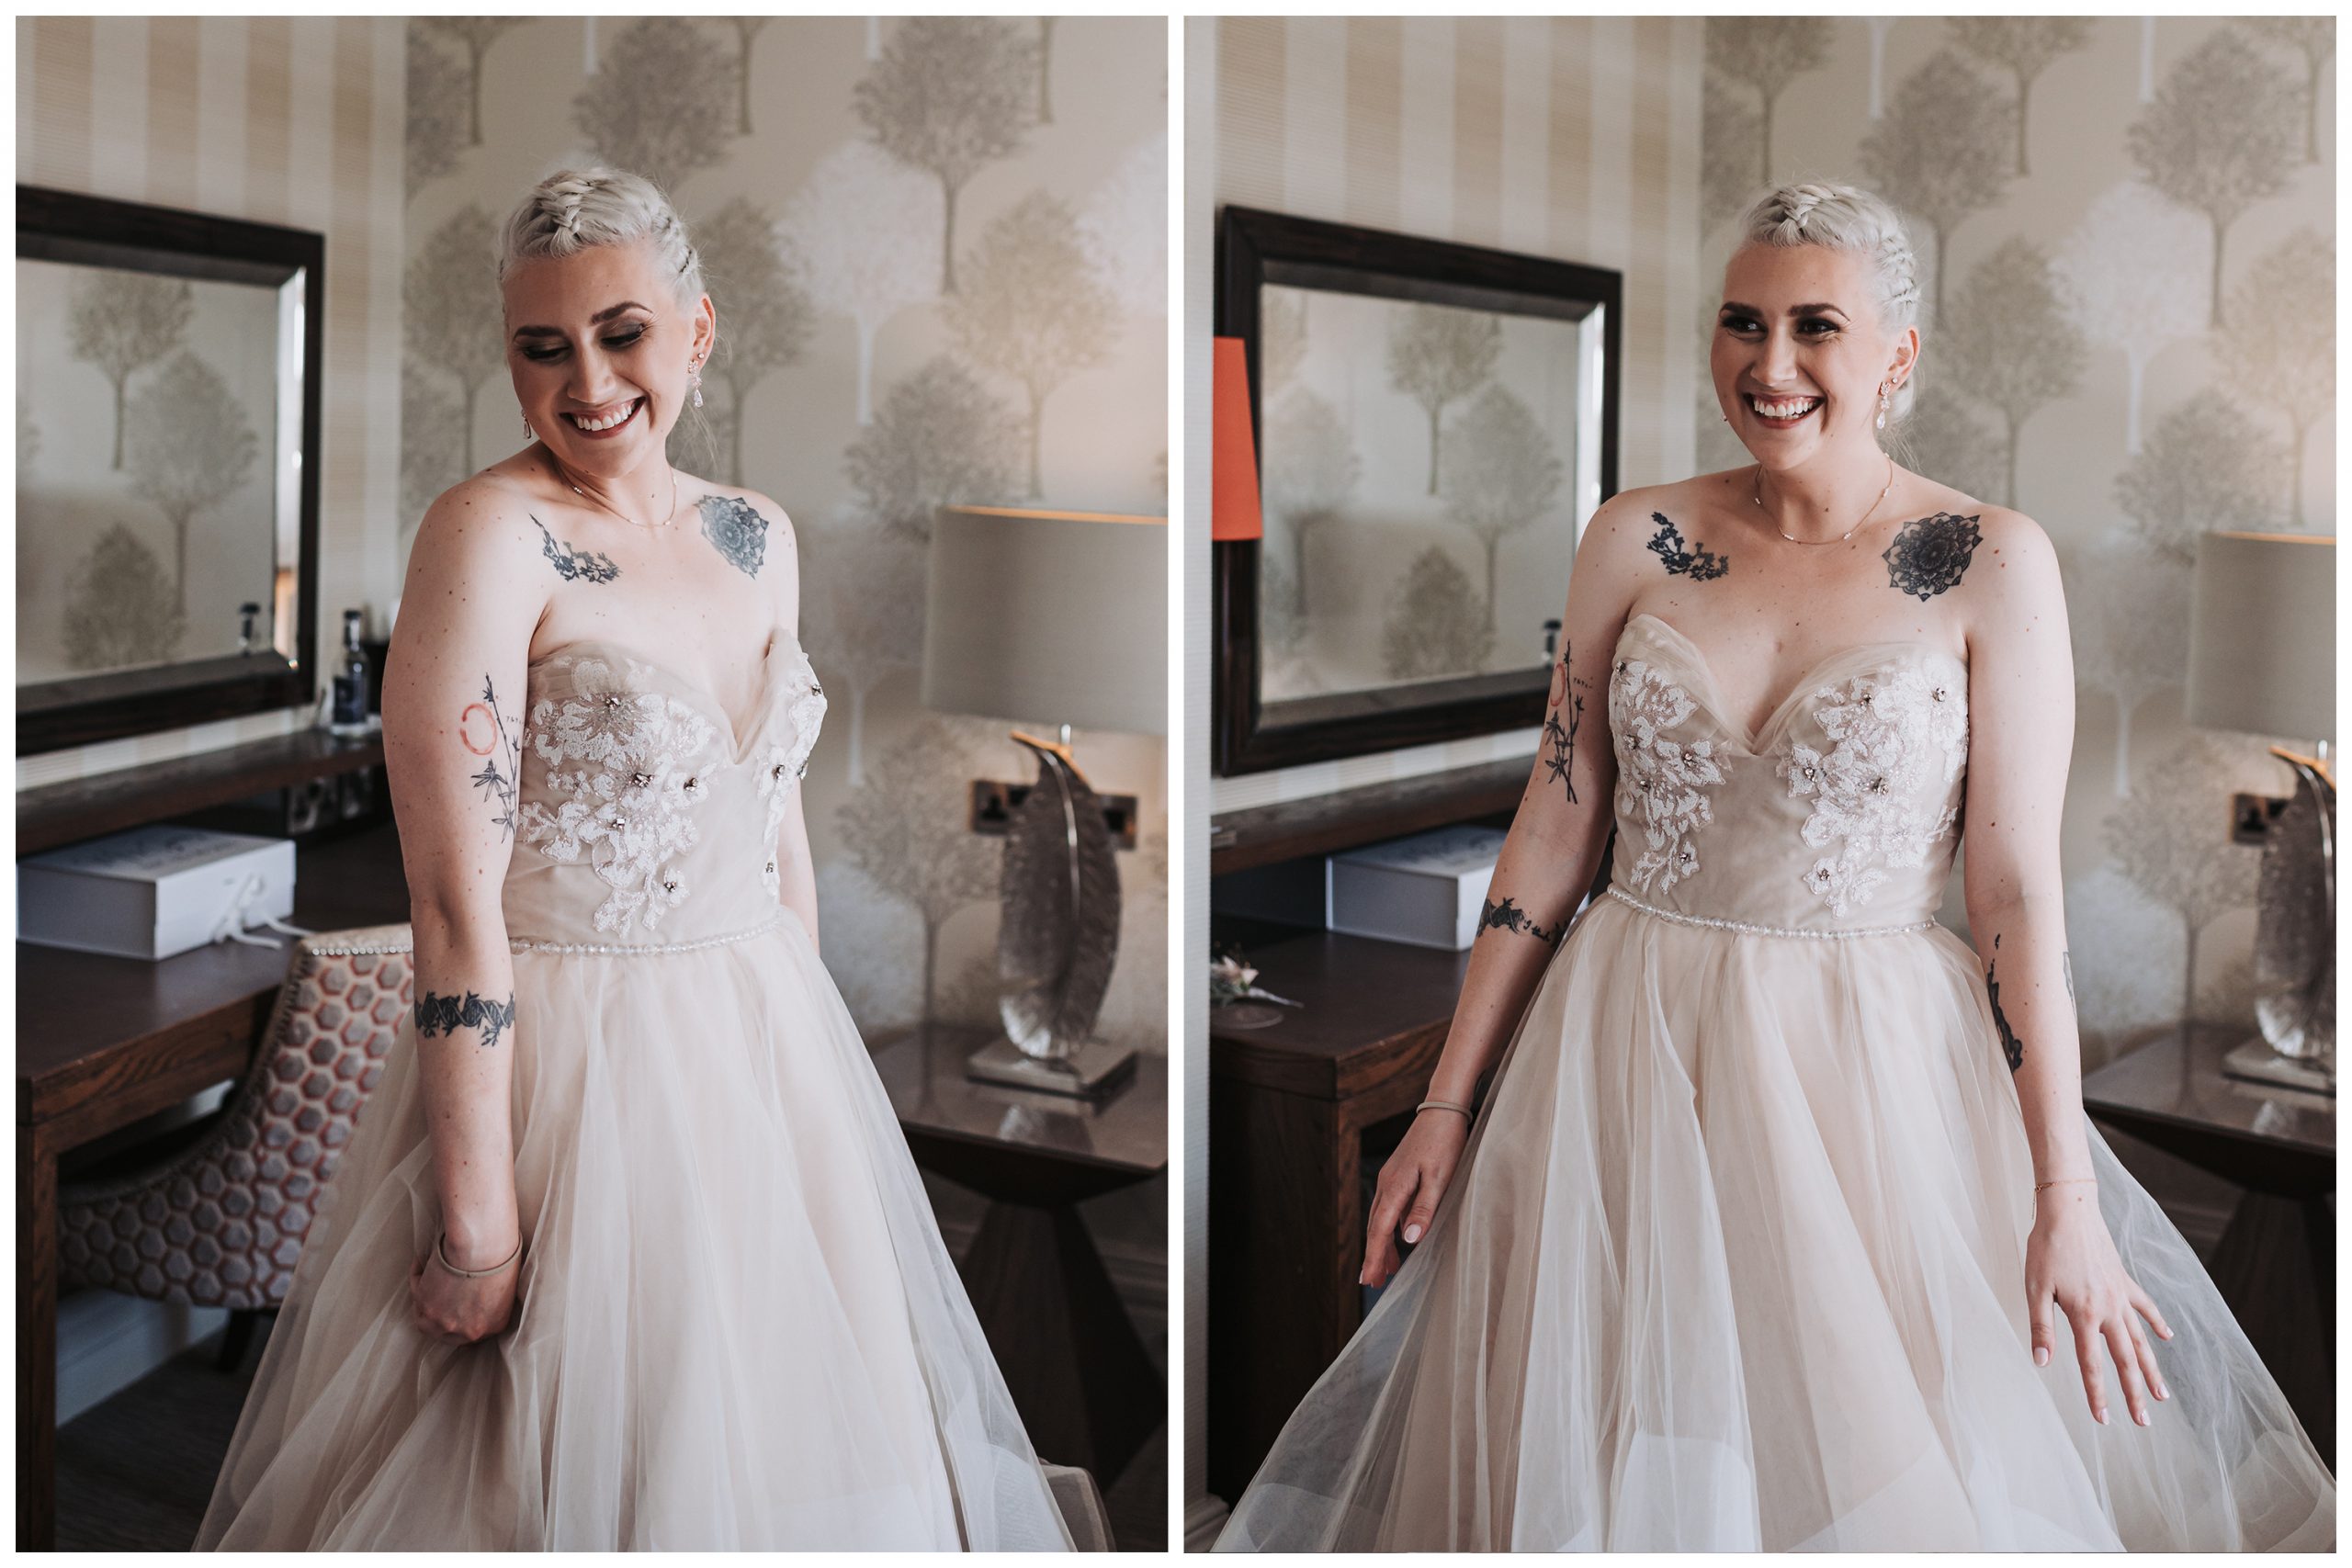 A bride wearing her beautiful wedding dress strikes smiling poses full of happiness in her dressing room on the morning of her wedding.